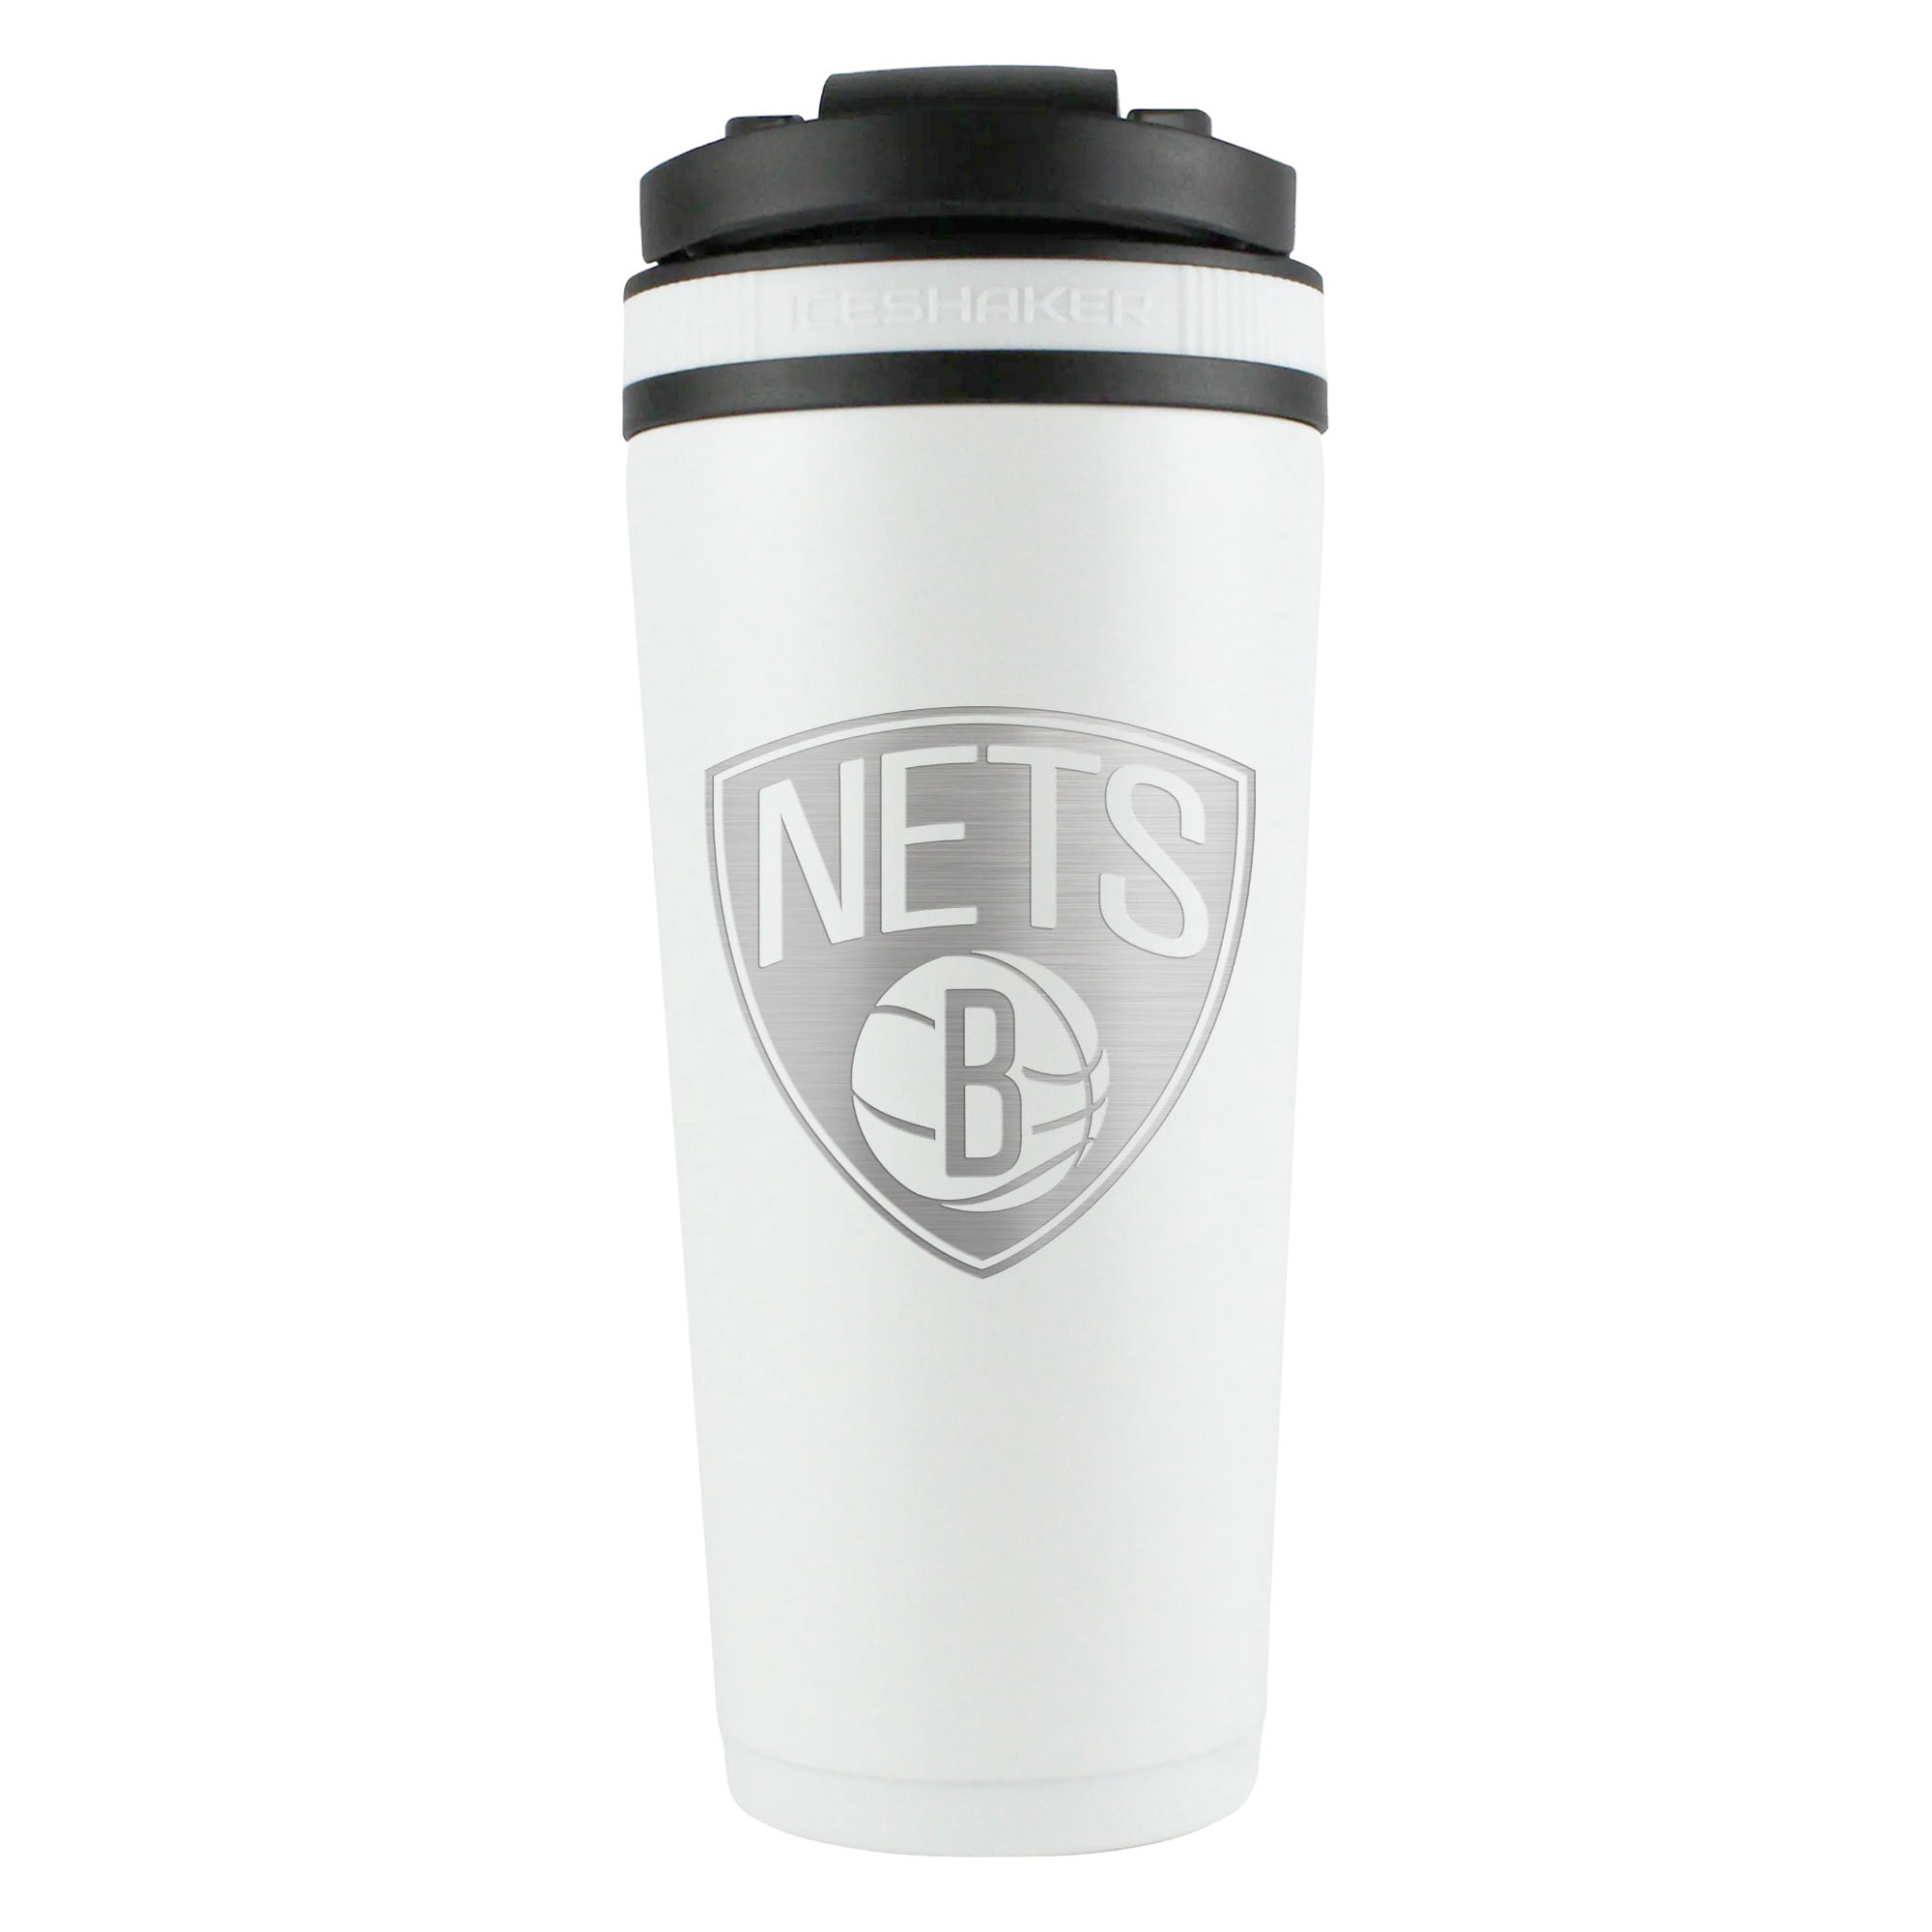 Officially Licensed Brooklyn Nets 26oz Ice Shaker - White